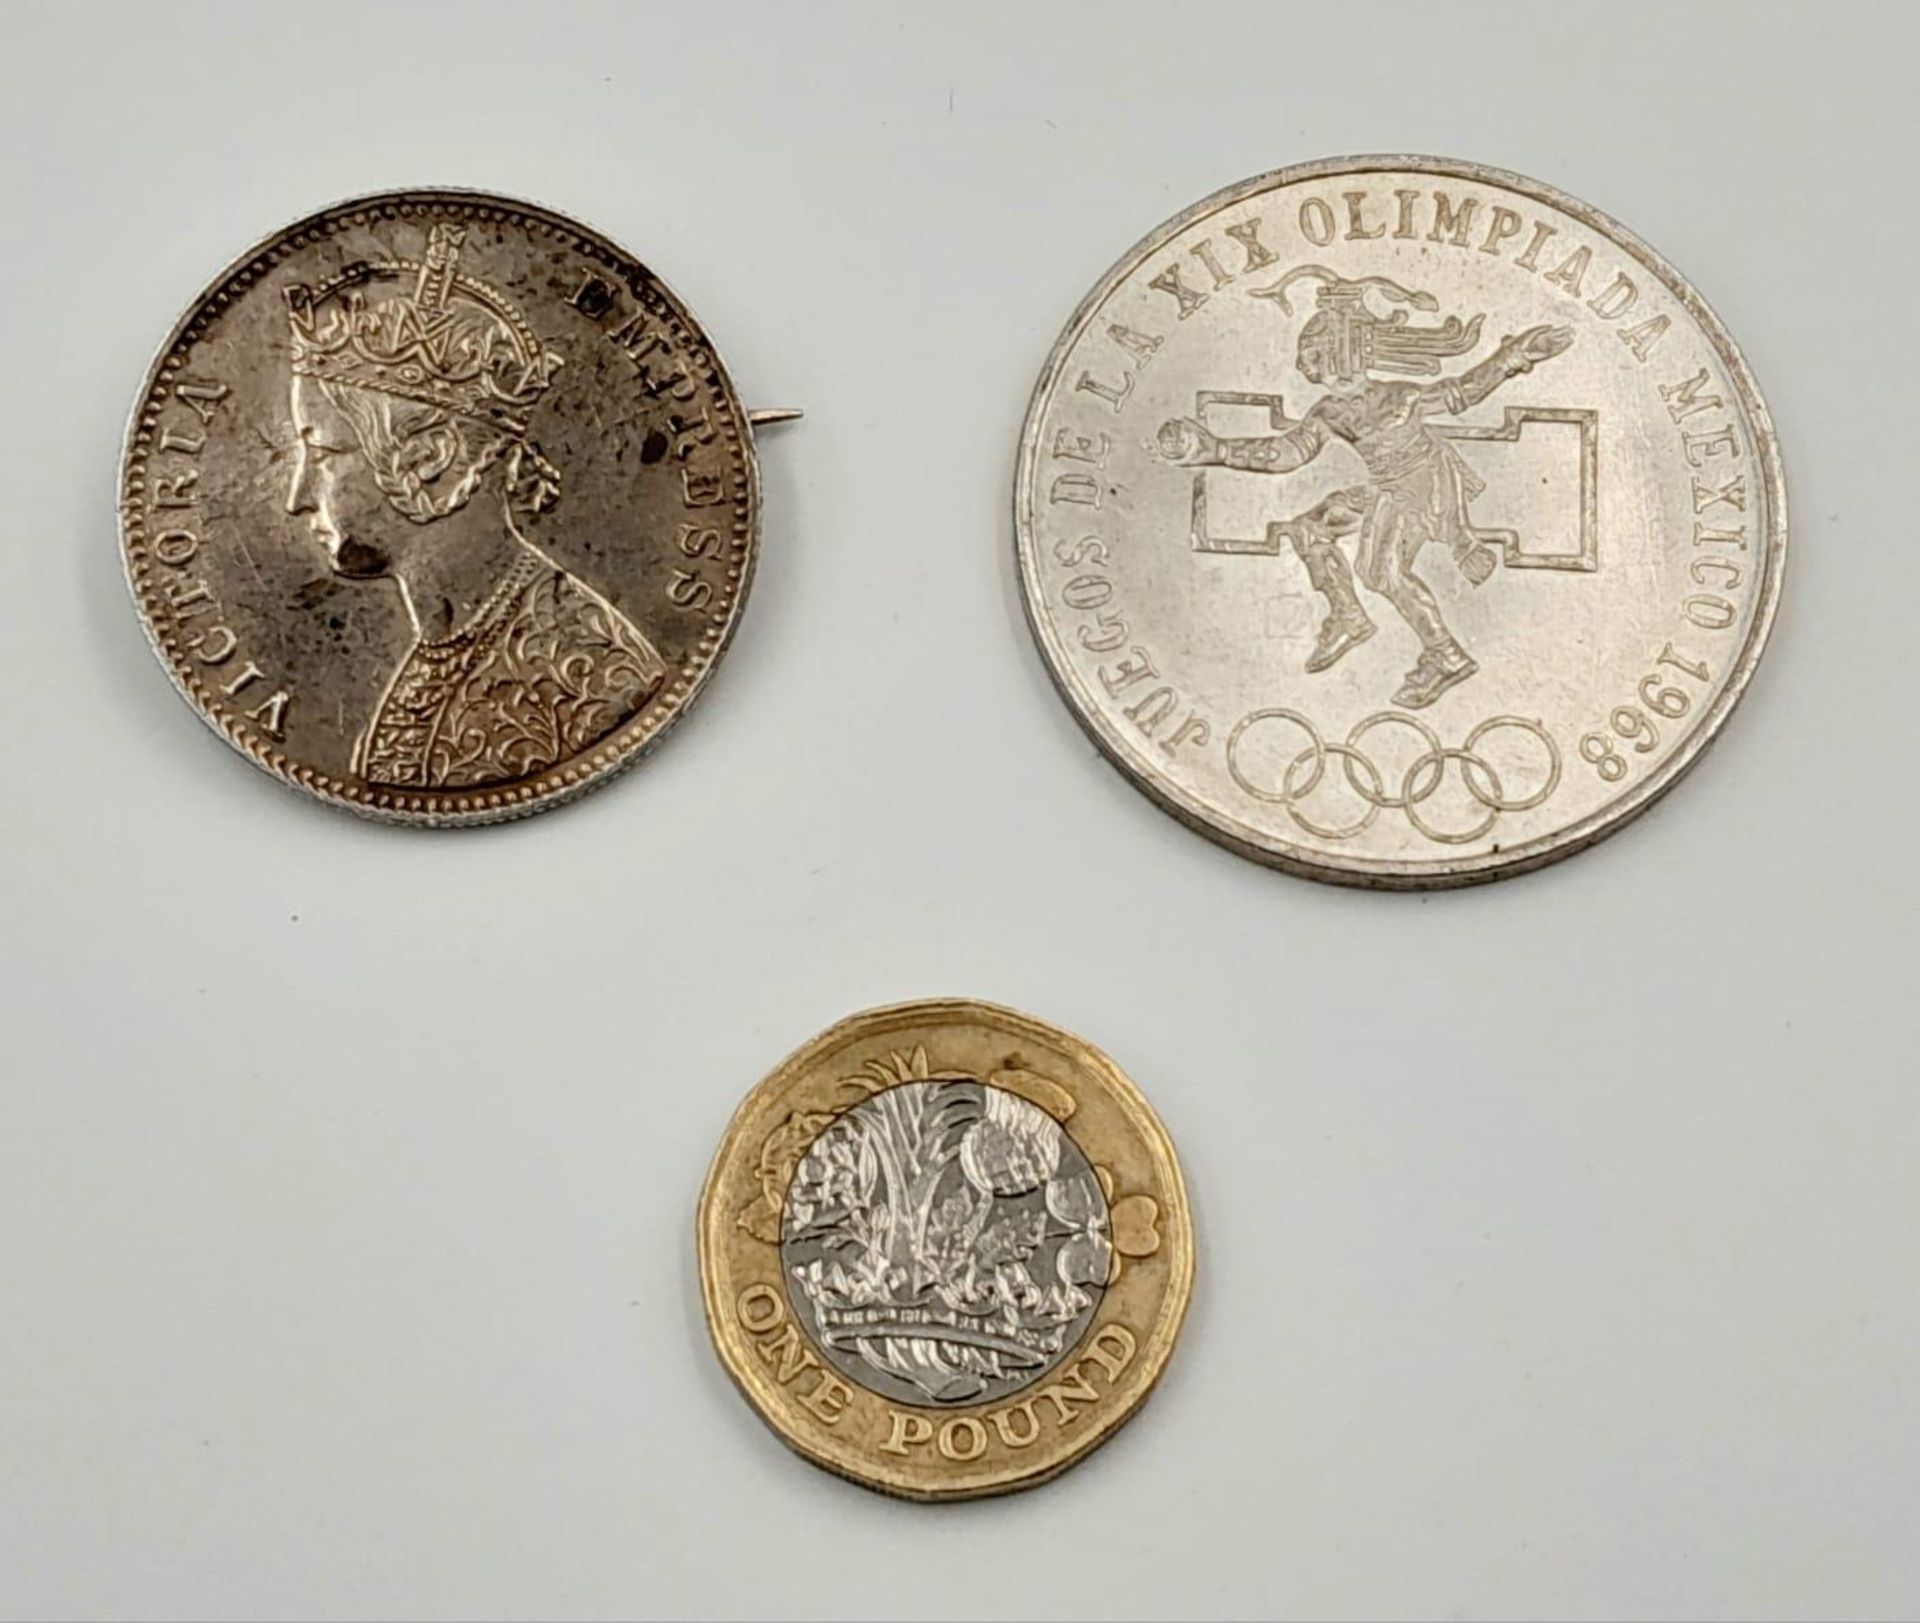 A 1968 Mexican Summer Olympics Silver 25 Pesos Coin and a 1901 Silver One Rupee Indian Brooch. - Image 4 of 4